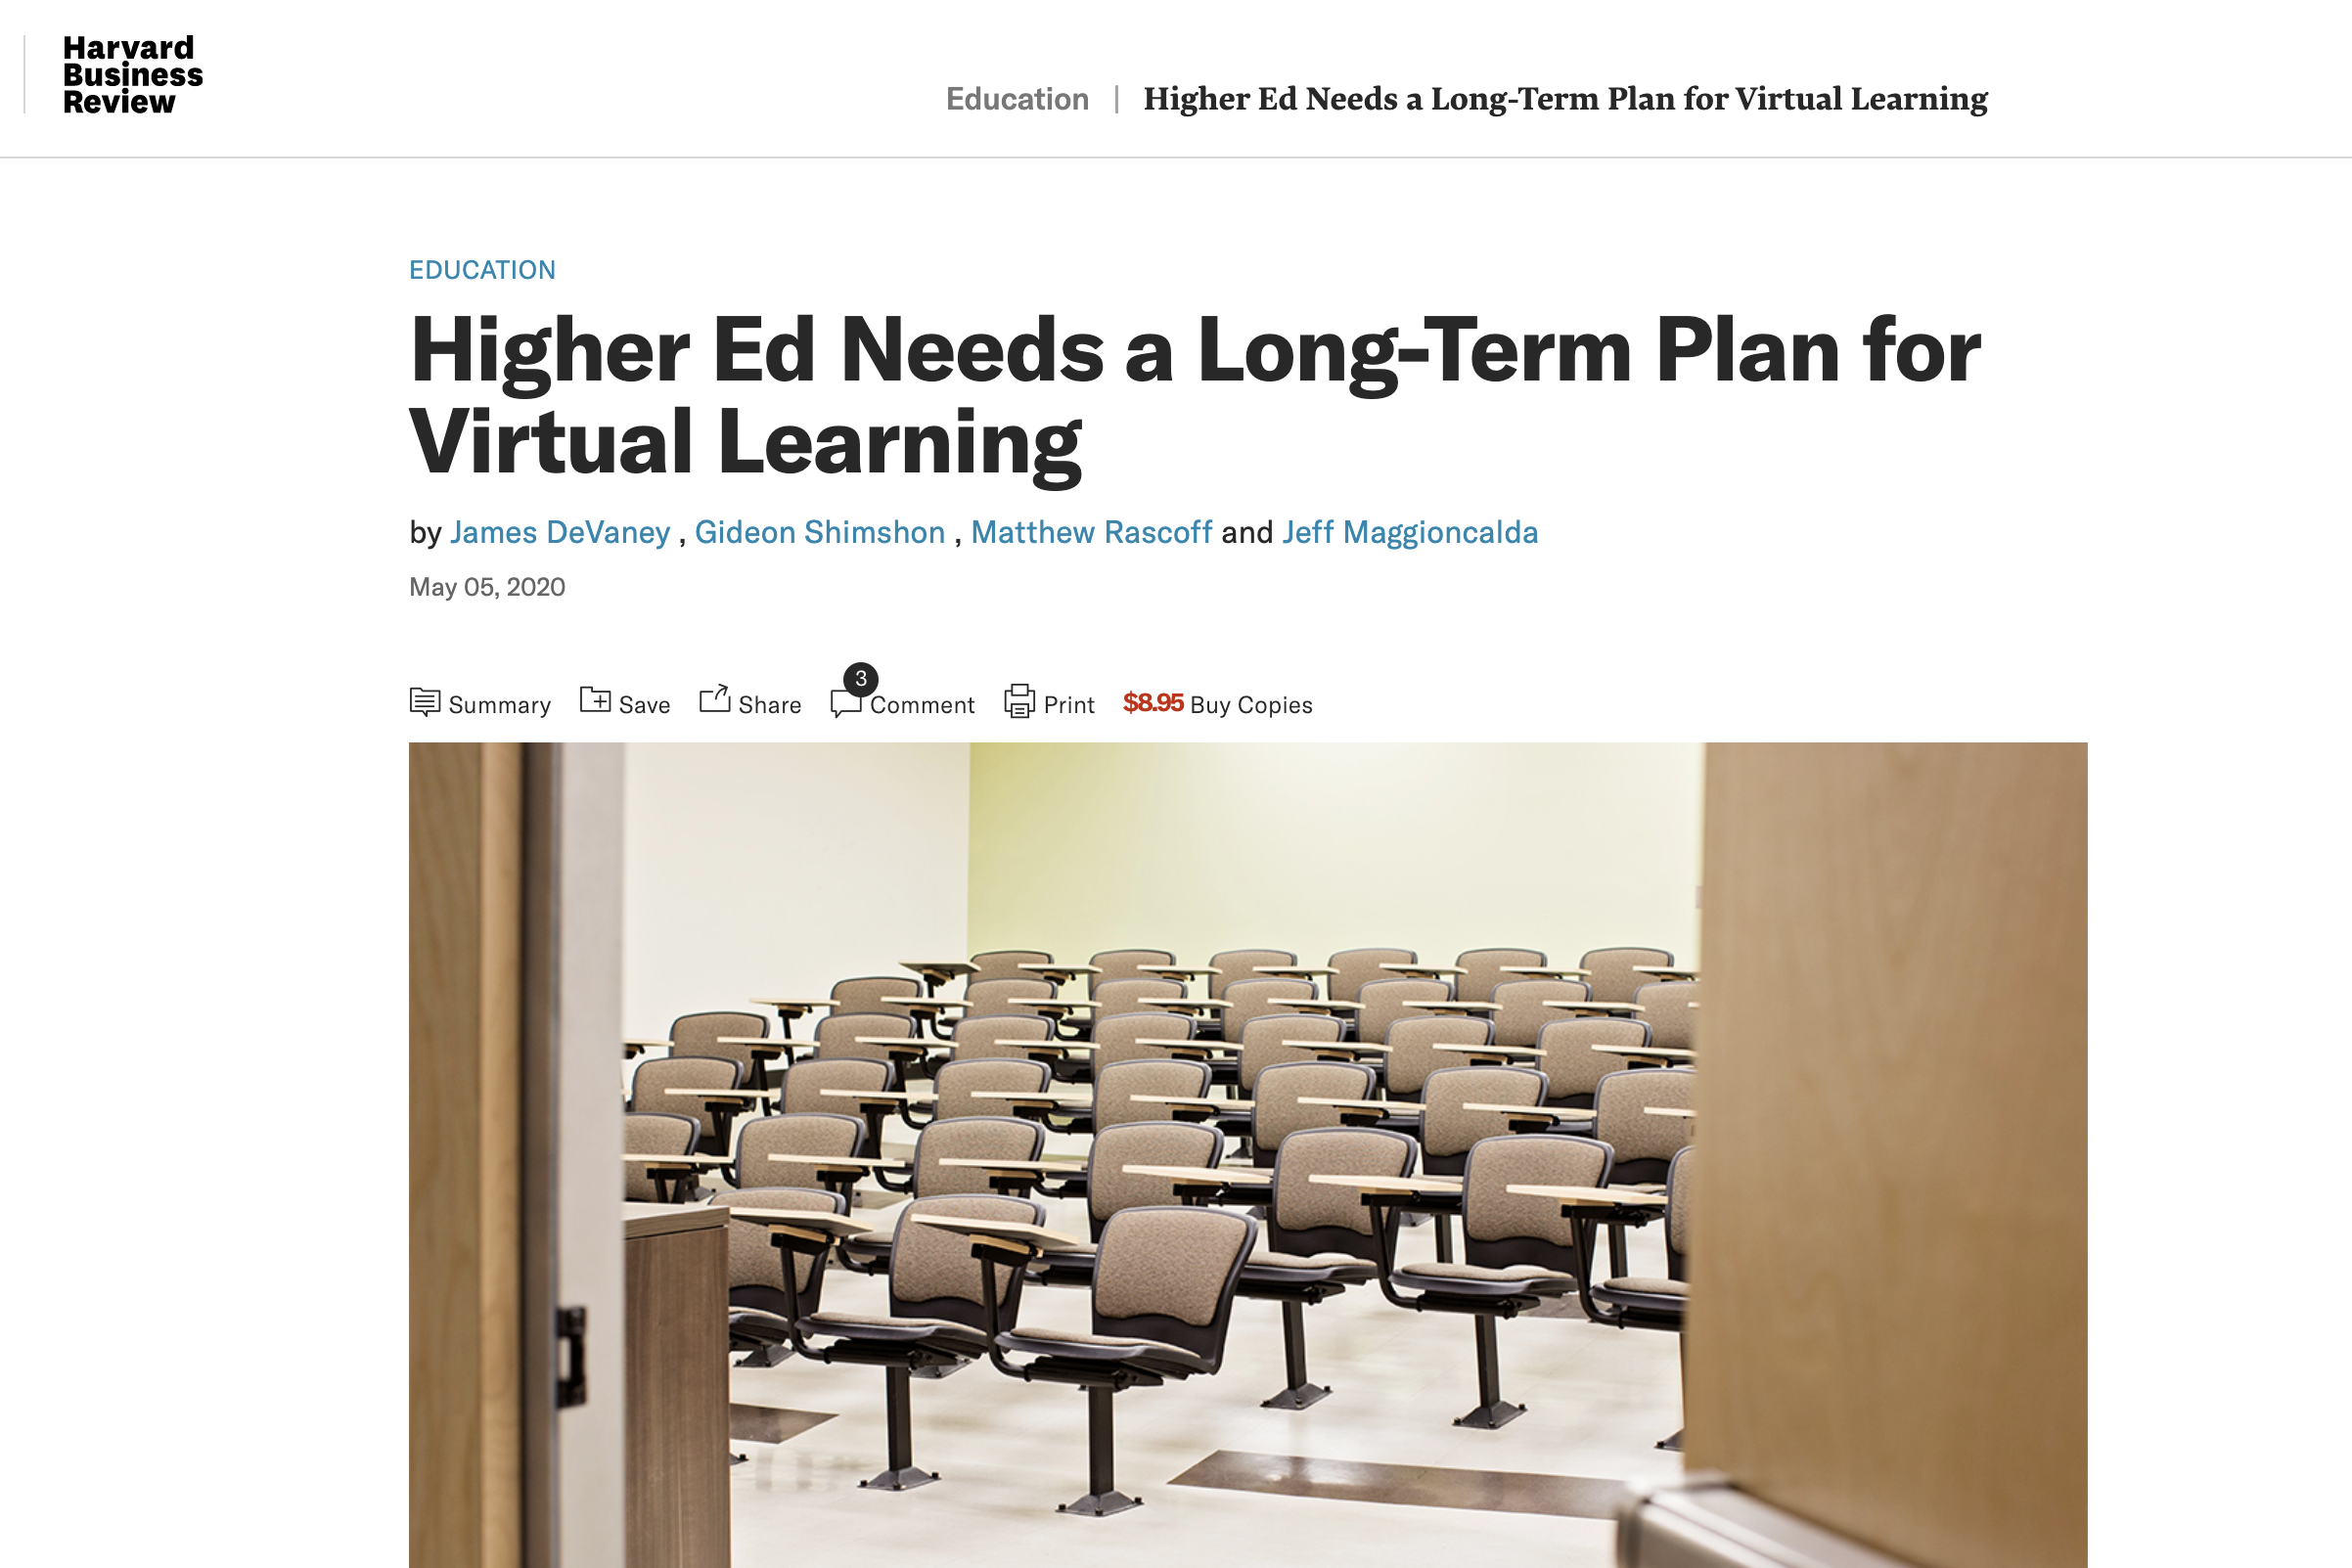 Higher Ed Needs a Long-Term Plan for Virtual Learning